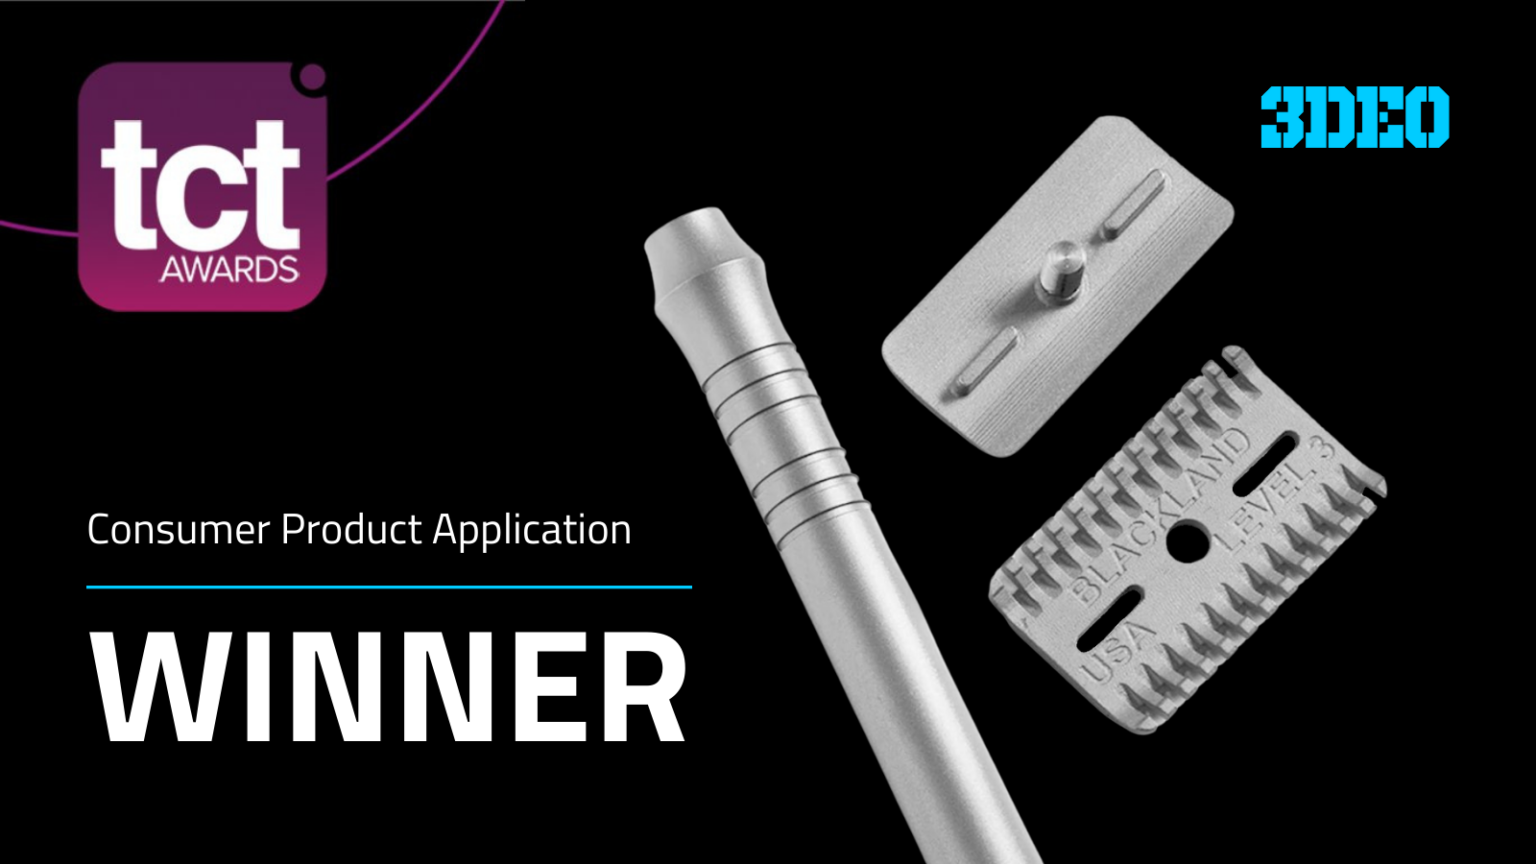 Logo of tct awards alongside a text "winner" in the consumer product application category, featuring images of a 3D printed razor and two intricate metal components on a dark background.